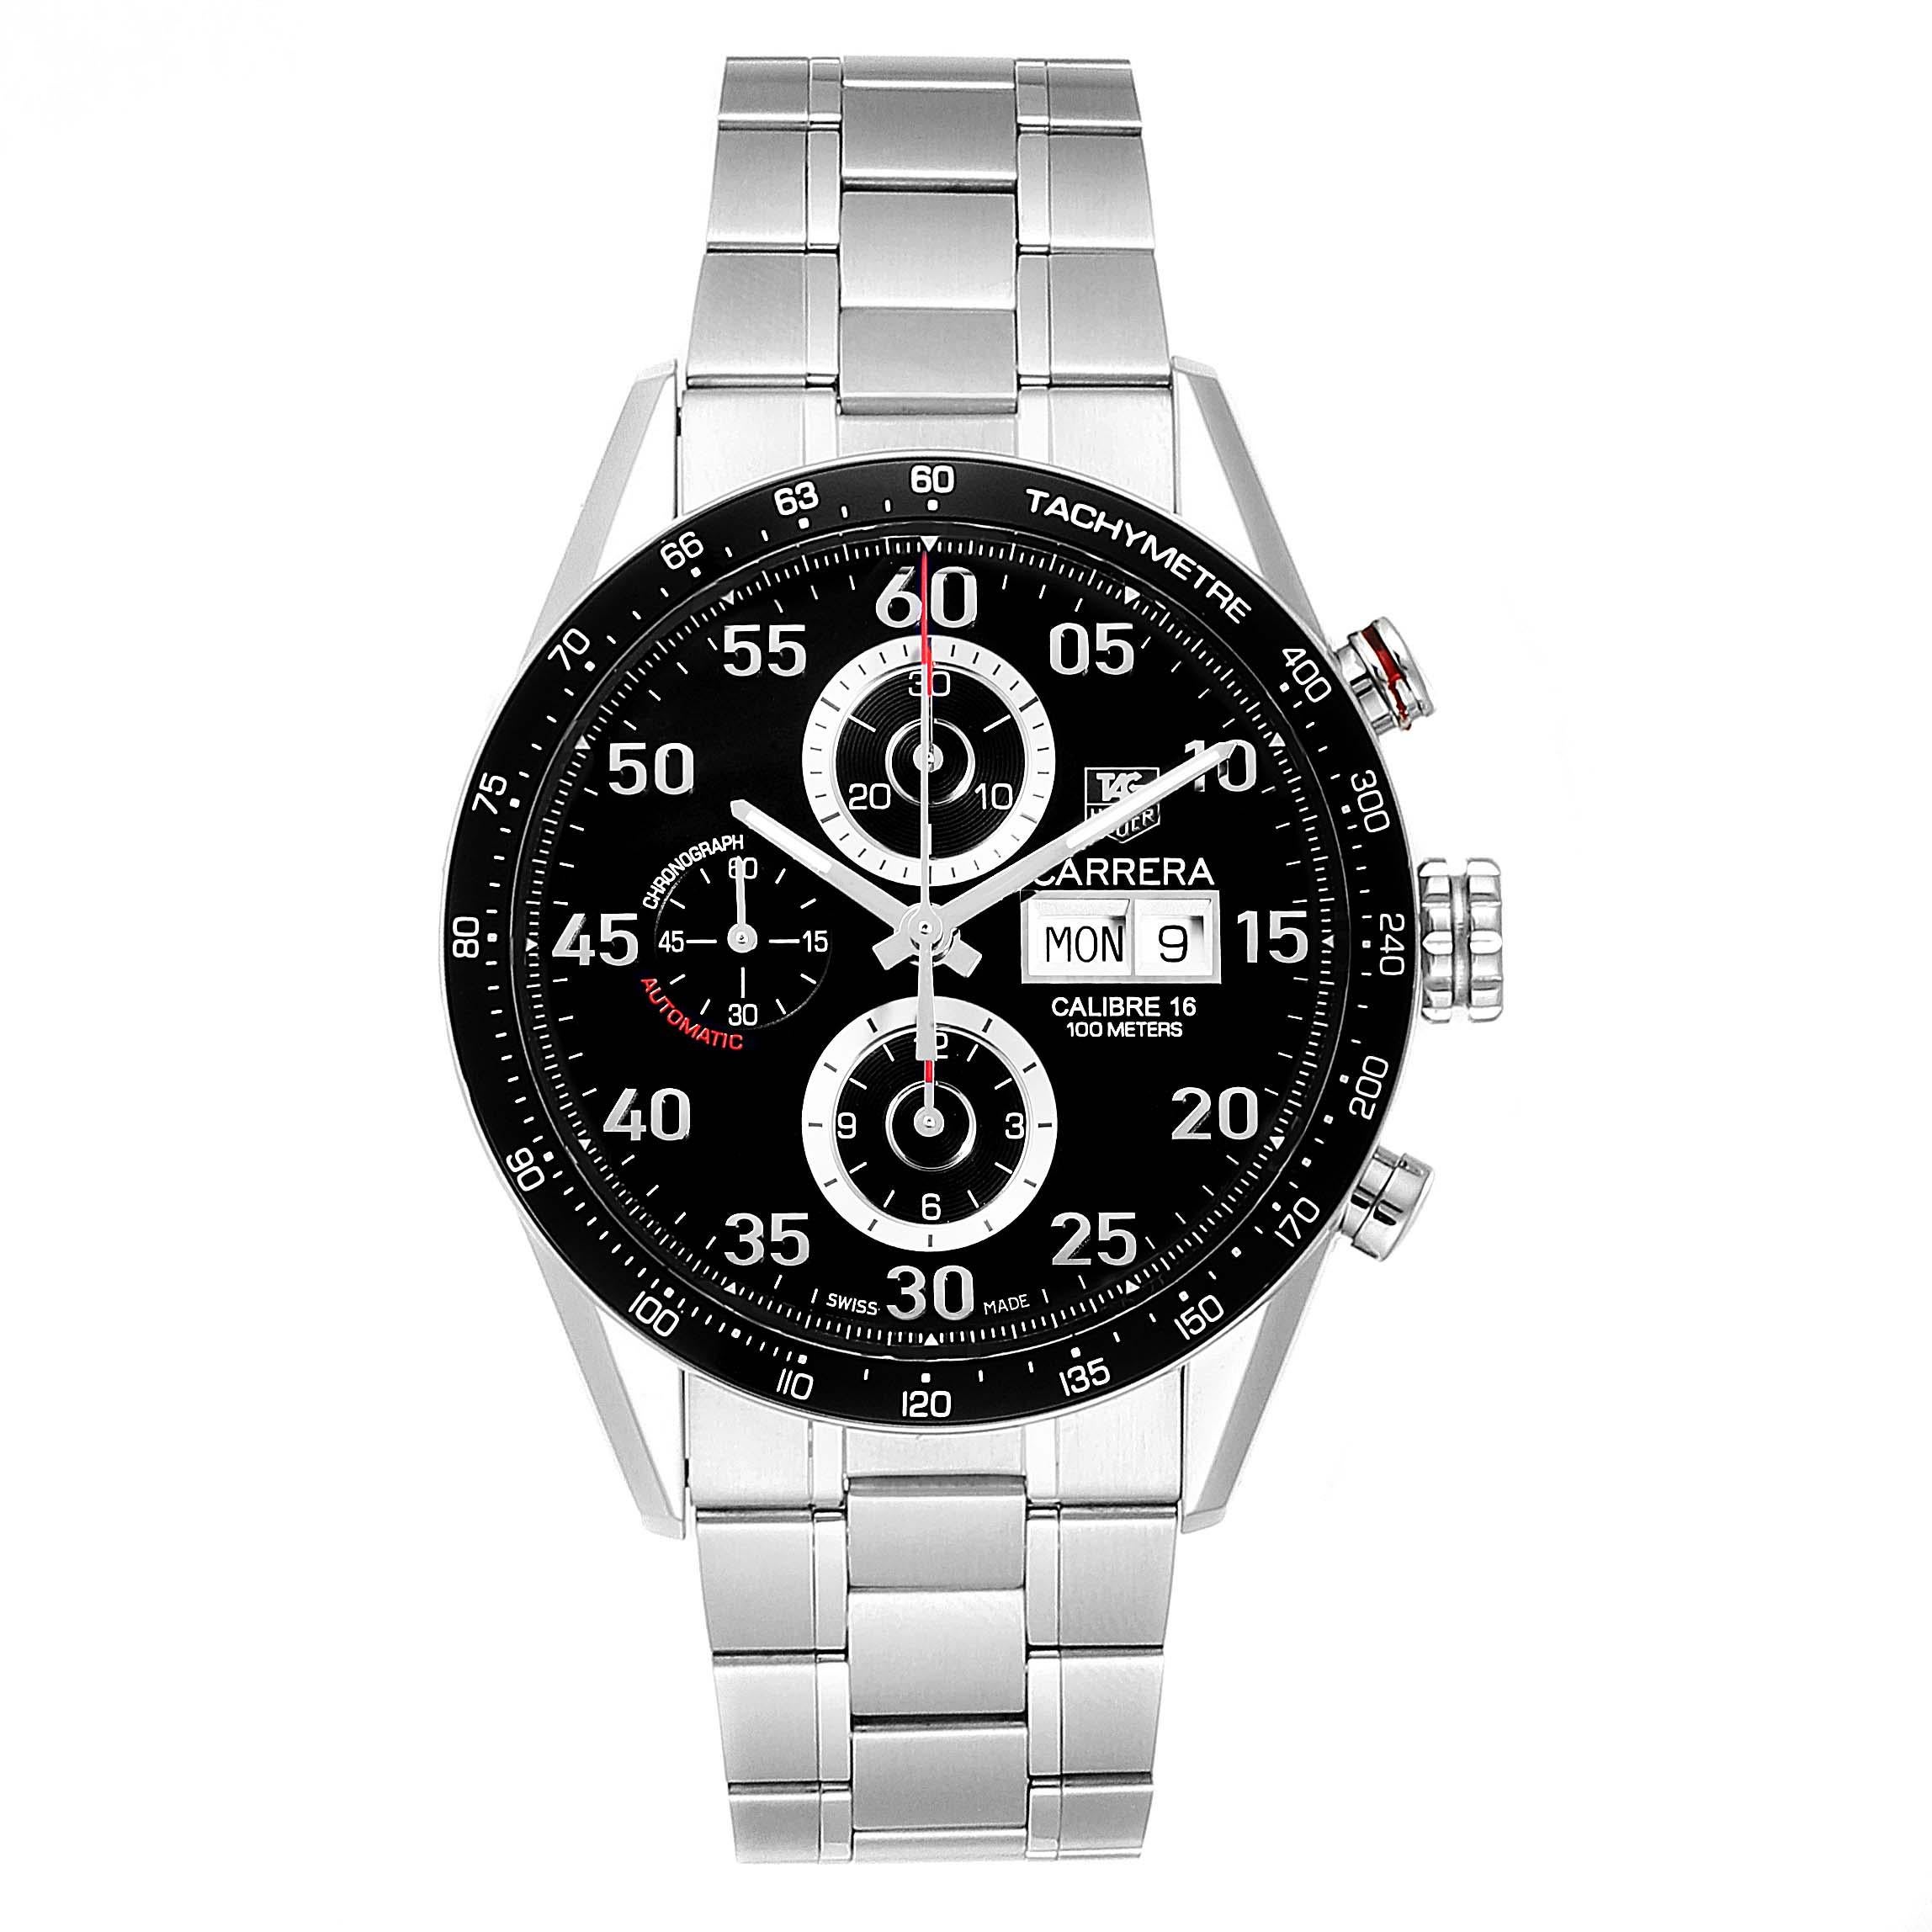 Tag Heuer Carrera Day Date Black Dial Steel Mens Watch CV2A10. Automatic self-winding movement. Polished stainless steel case 43.0 mm. Case thickness: 12 mm. Black bezel with tachymeter scale. Scratch resistant sapphire crystal. Black dial with